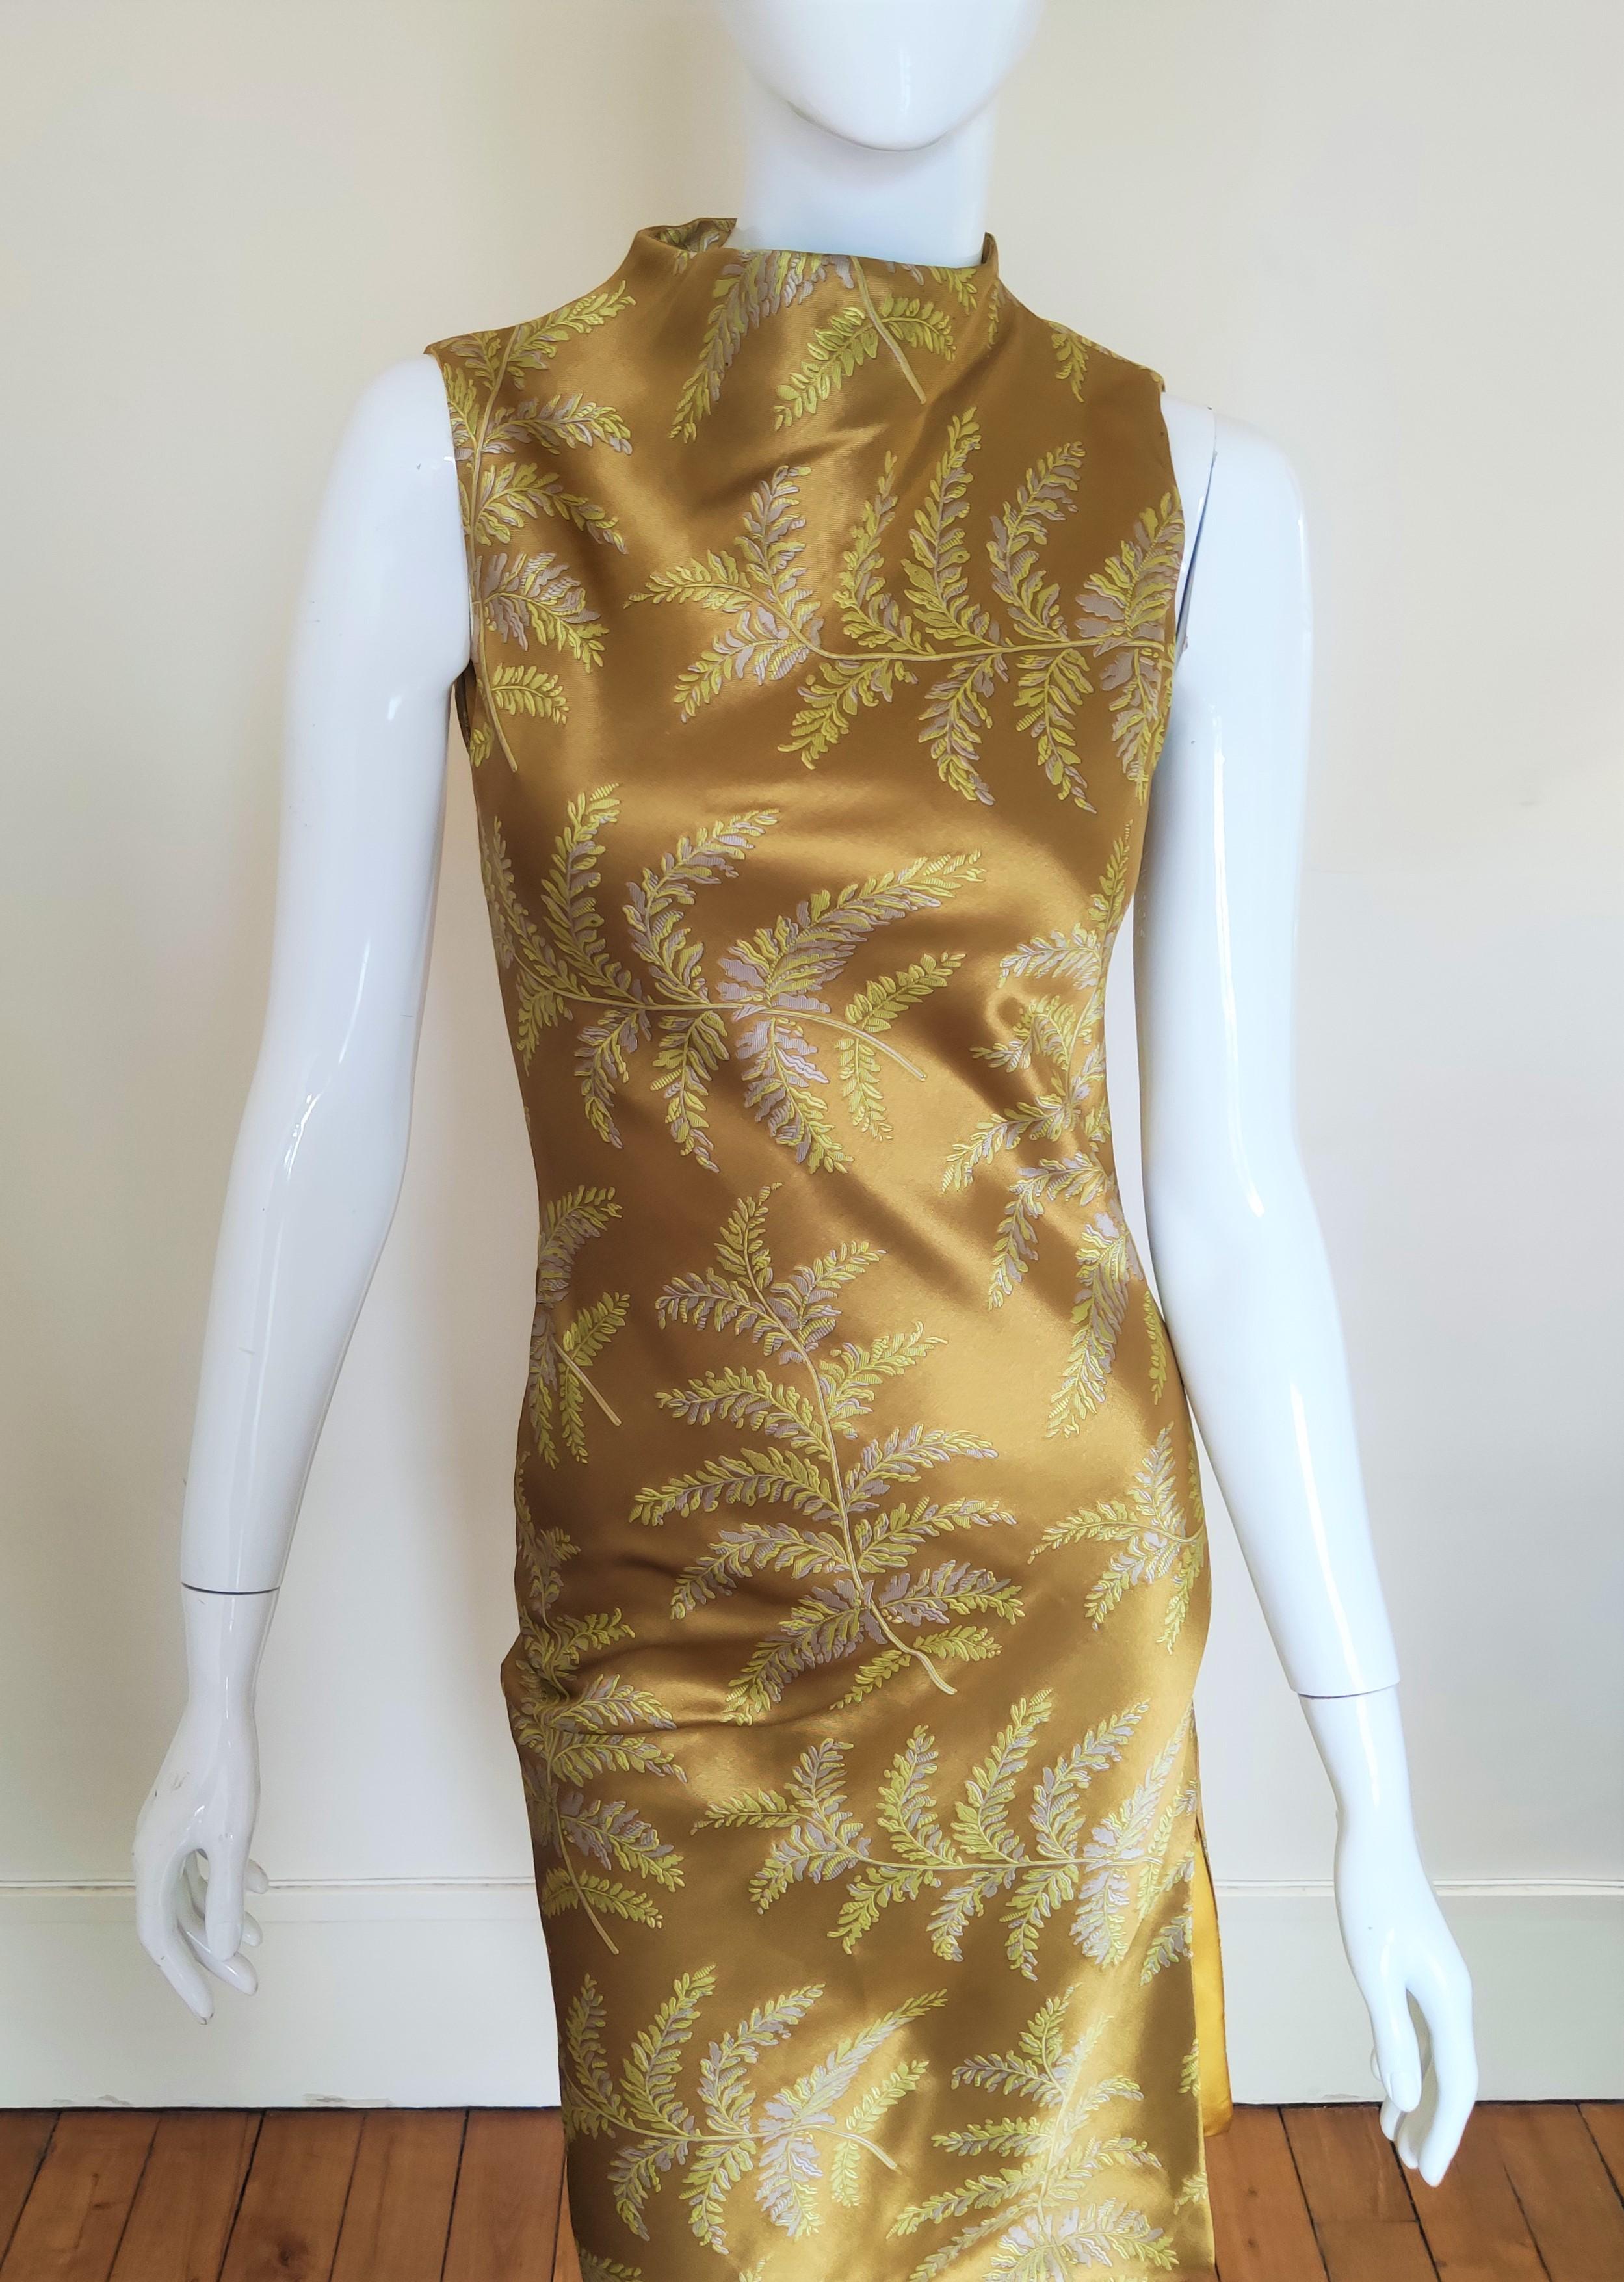 Atelier Gianni Versace Silk Mustard Yellow Floral Leaf Evening Baroque Dress For Sale 7